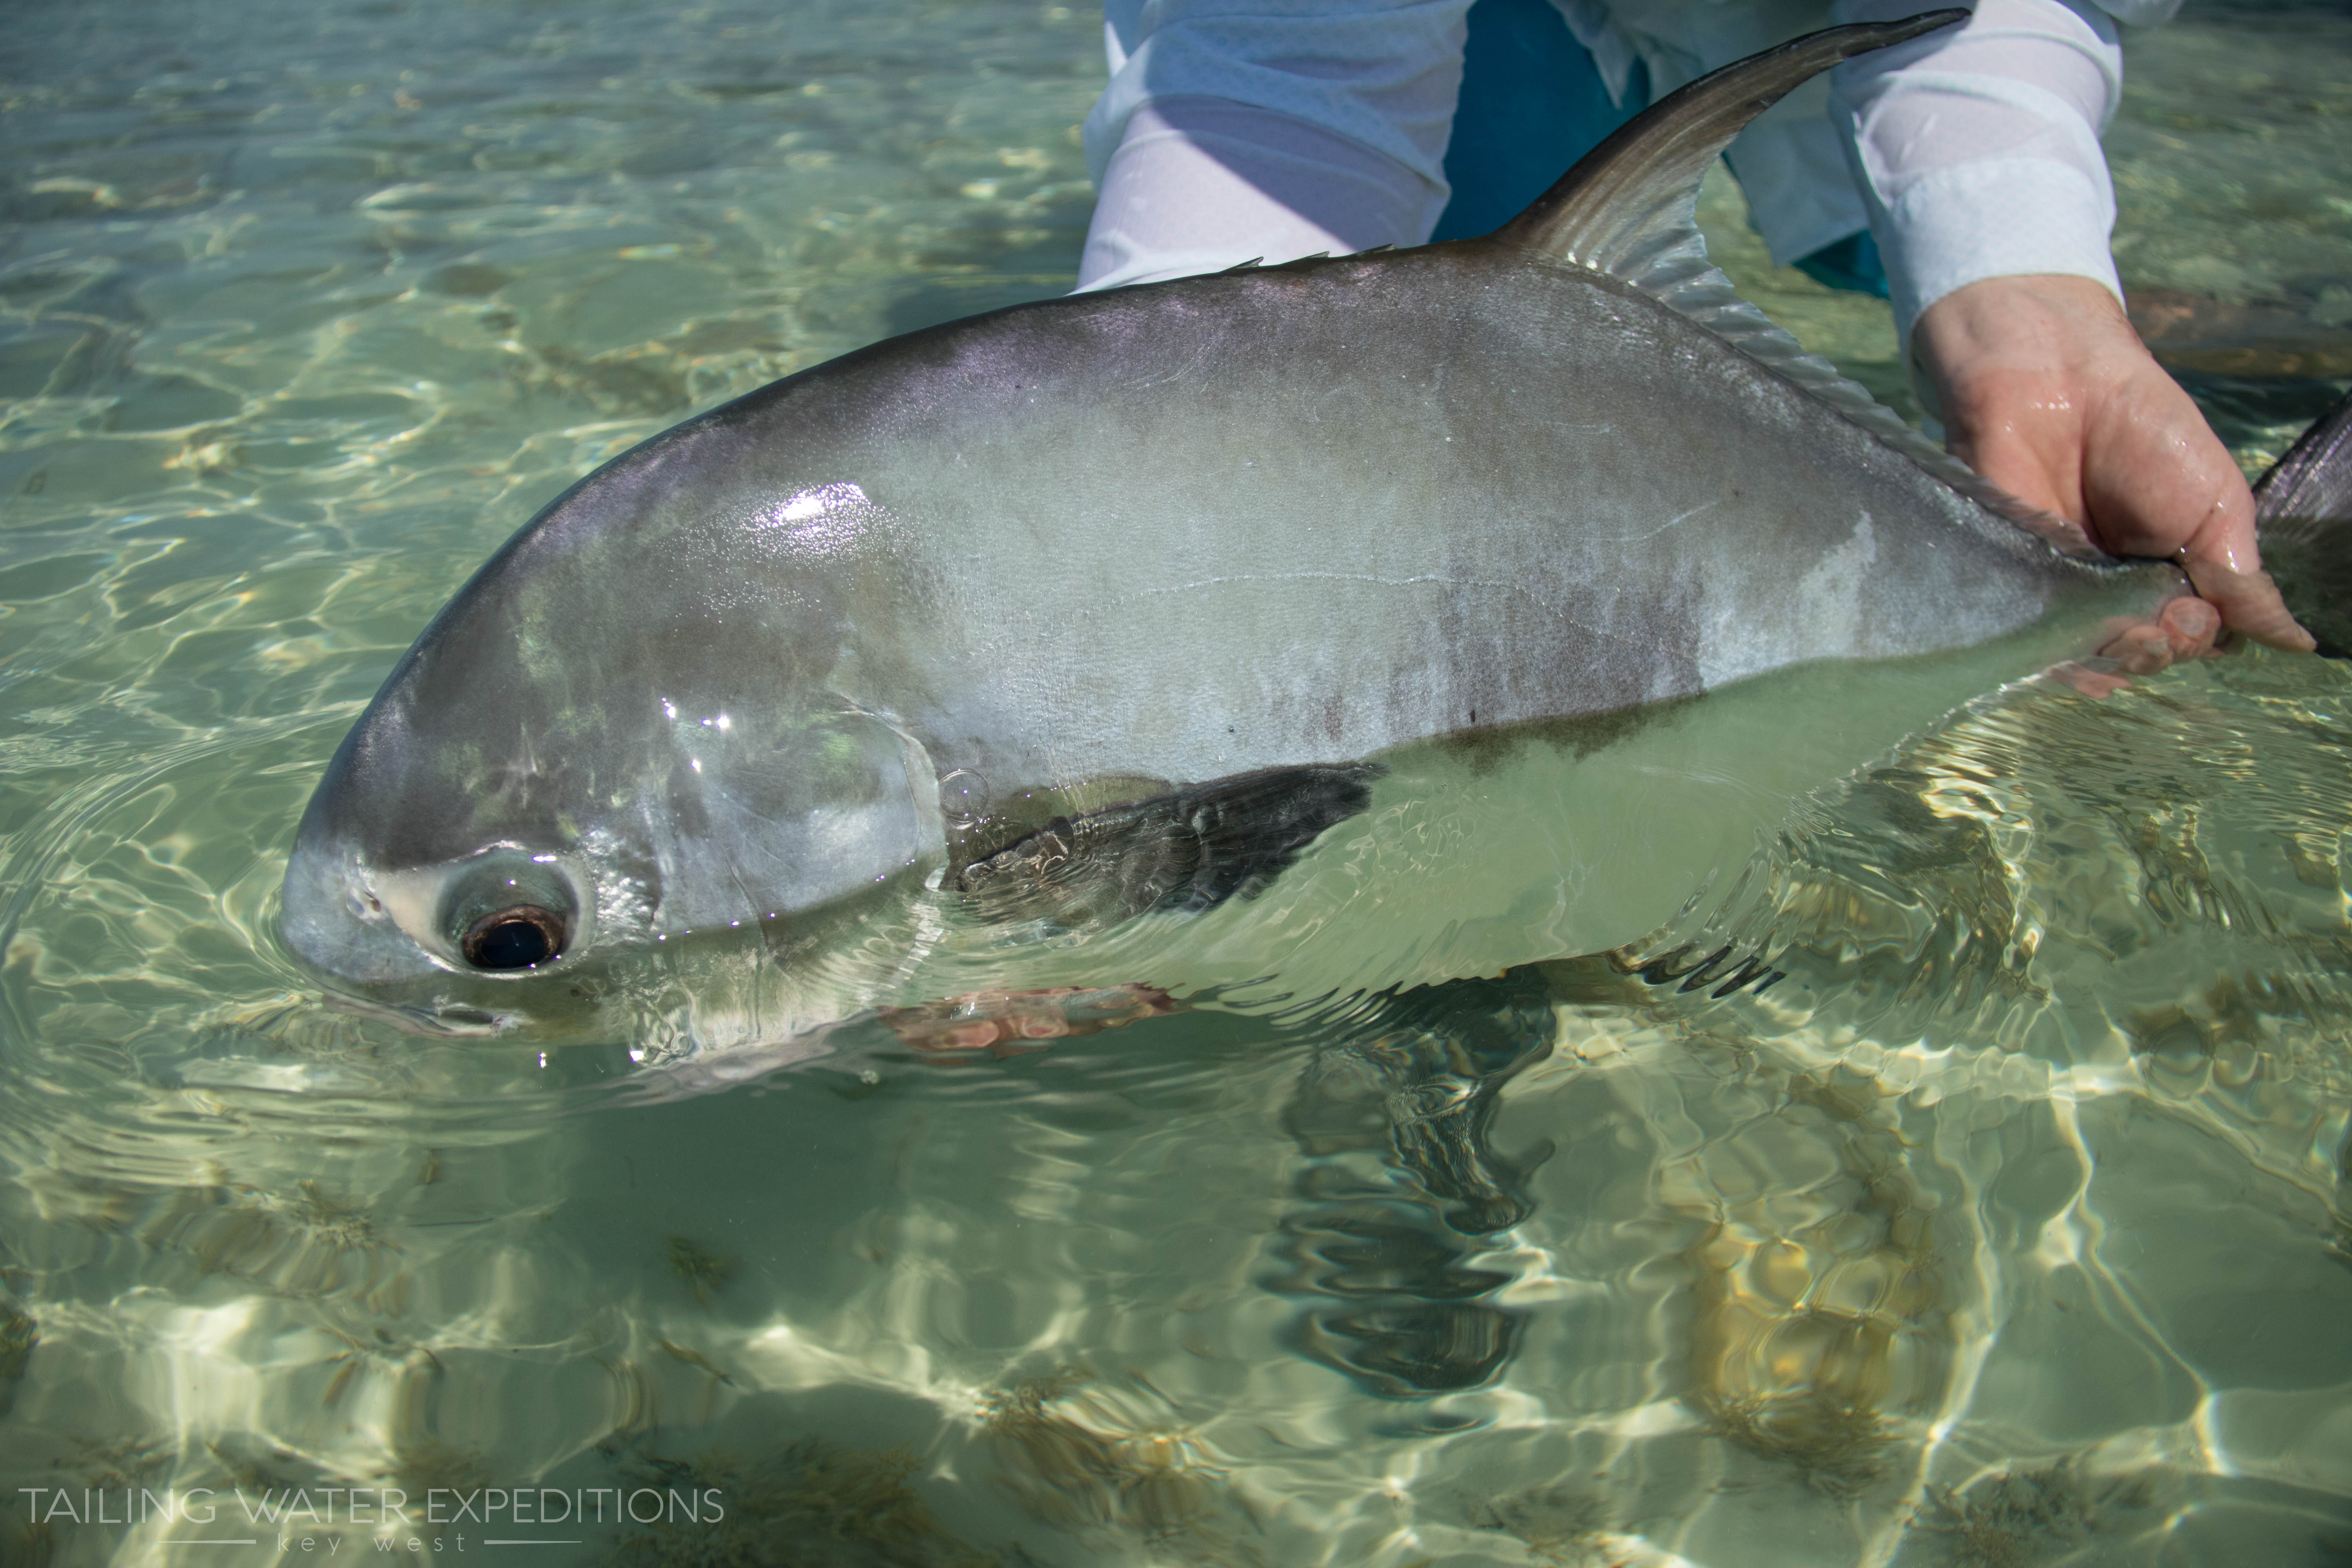 The permit is one of the coolest shallow water sportfish in the world!